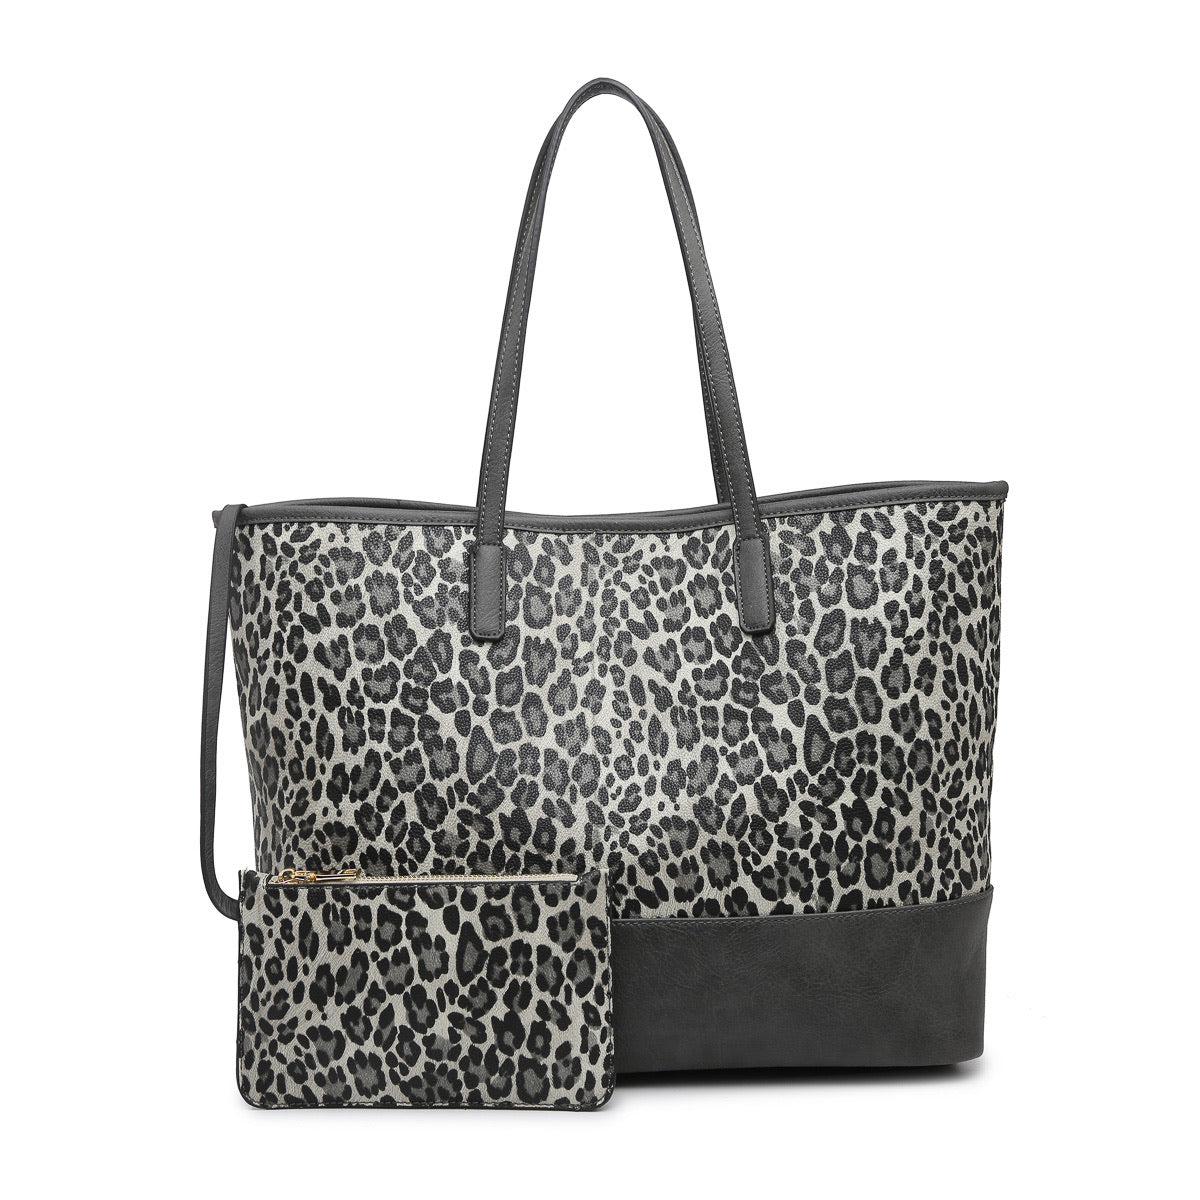 Animal Print Tote with Coordinating Wallet